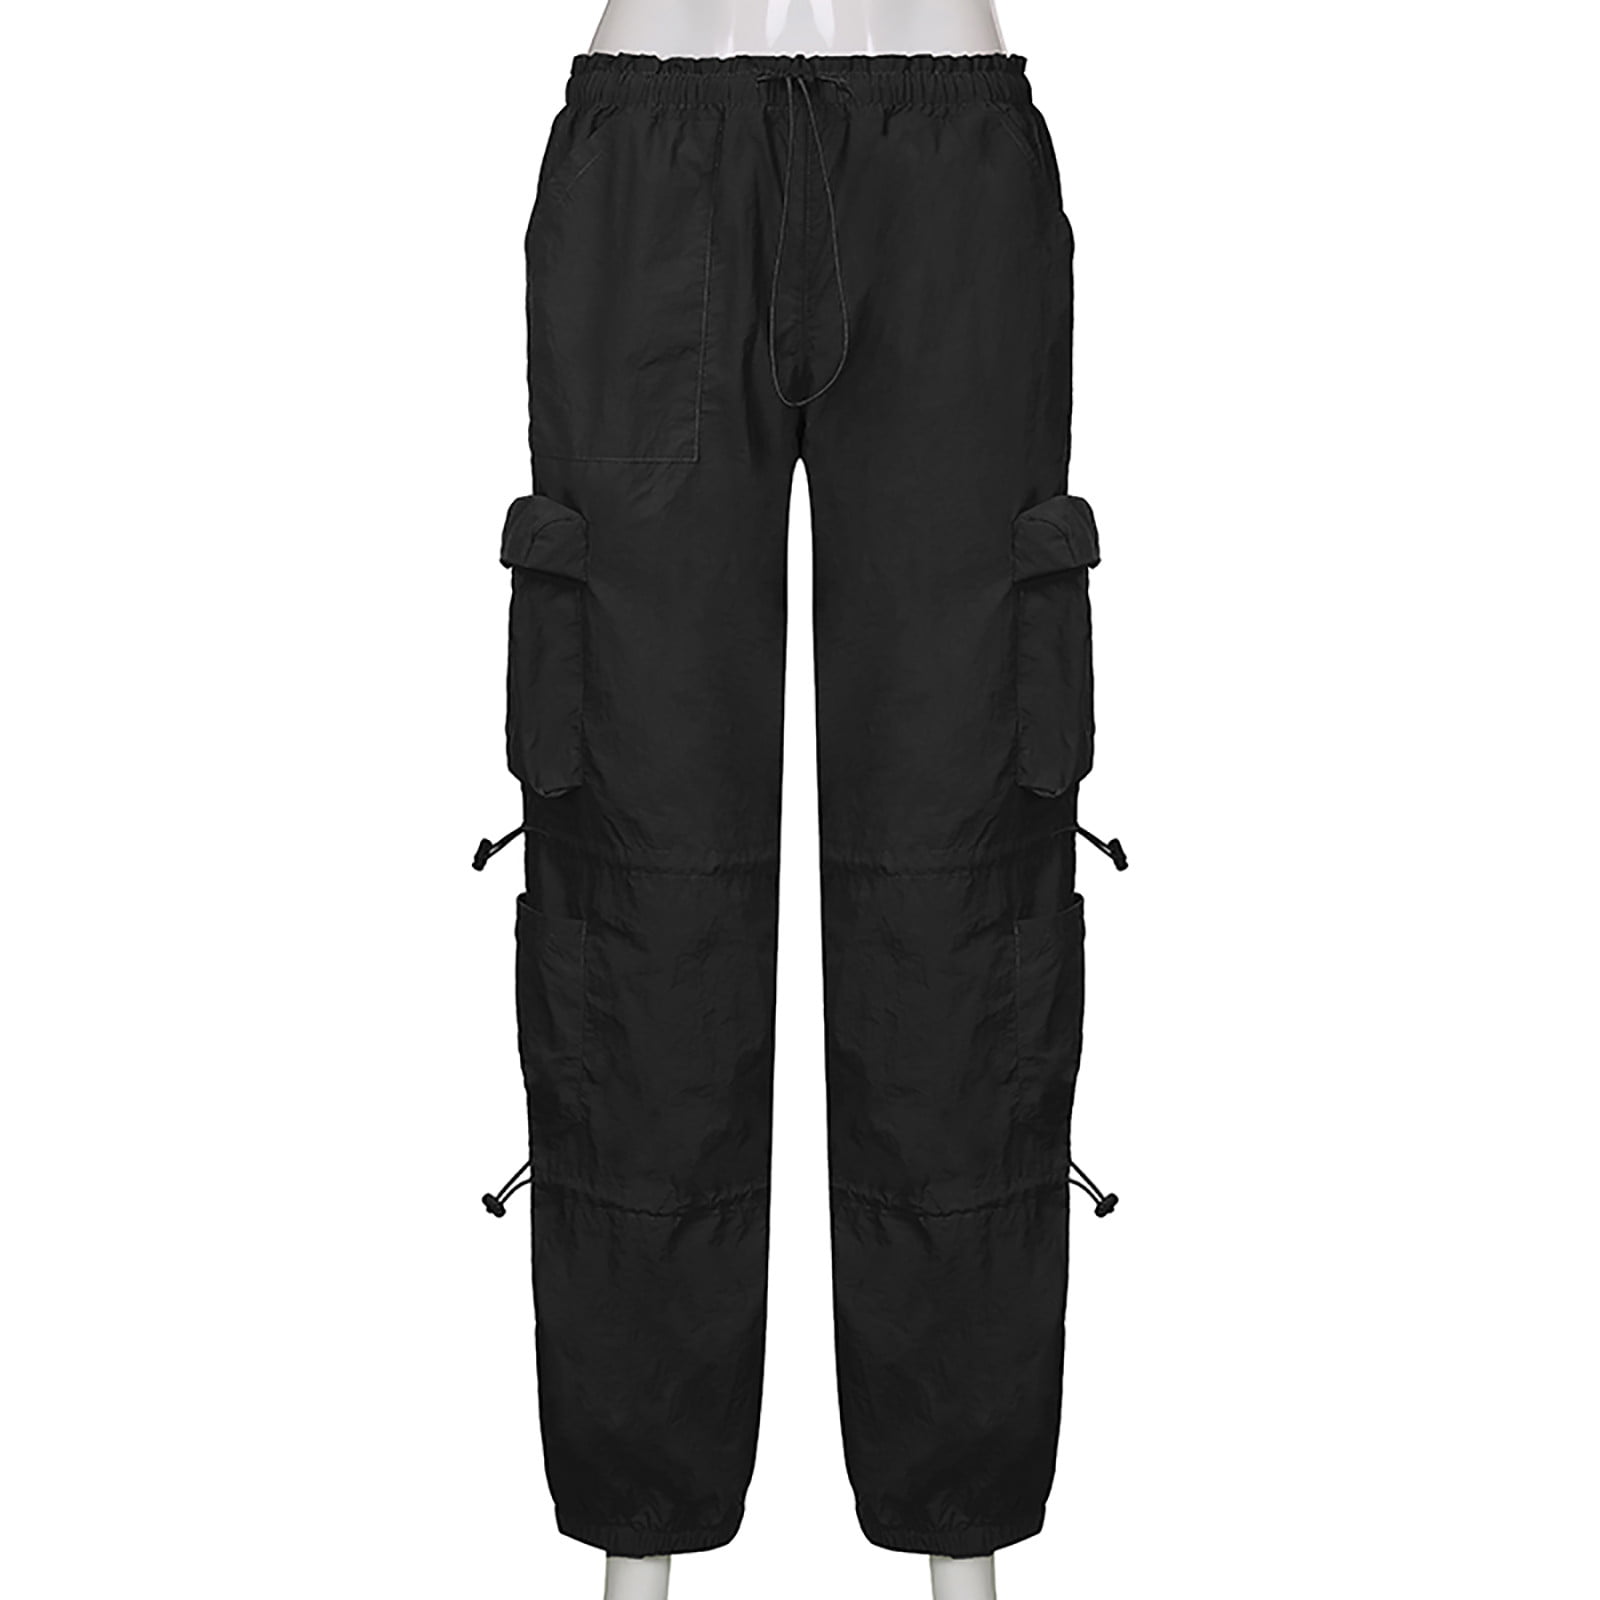 Men's Cargo Pants Casual Multi Pocket Military Tactical Work Pants |  Frimunt Clothing Co.